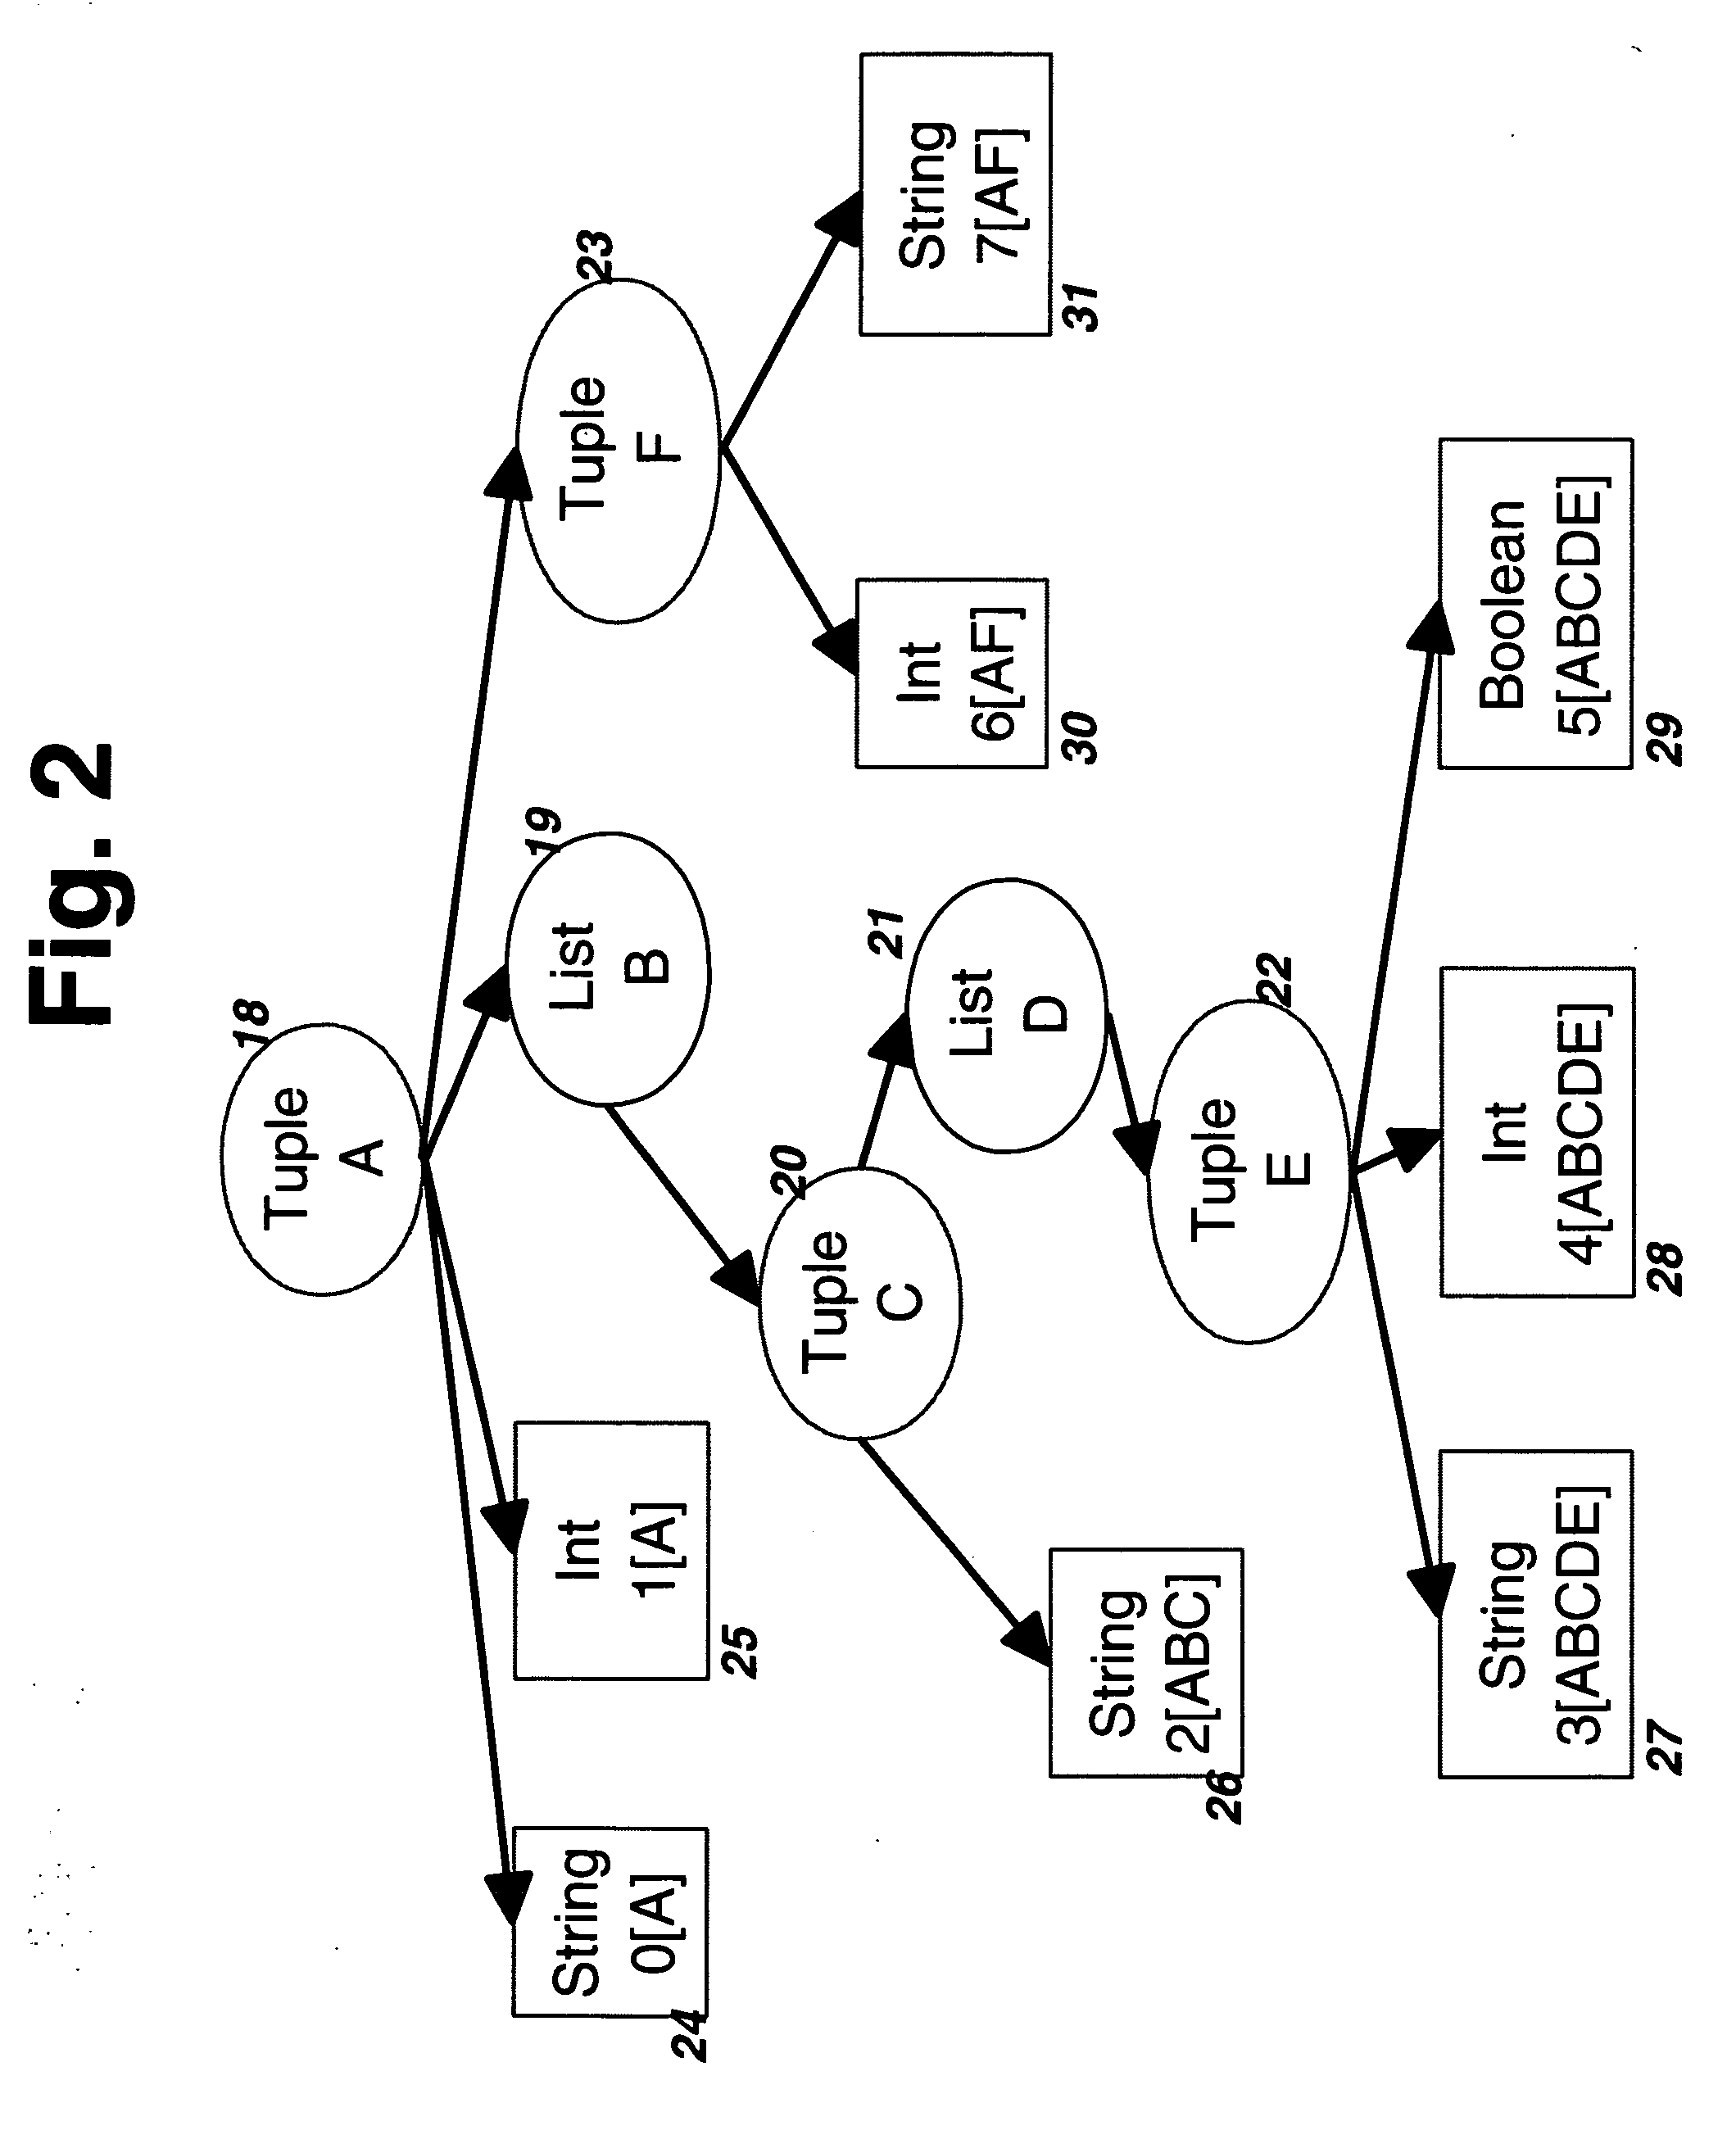 Byte stream organization with improved random and keyed access to information structures